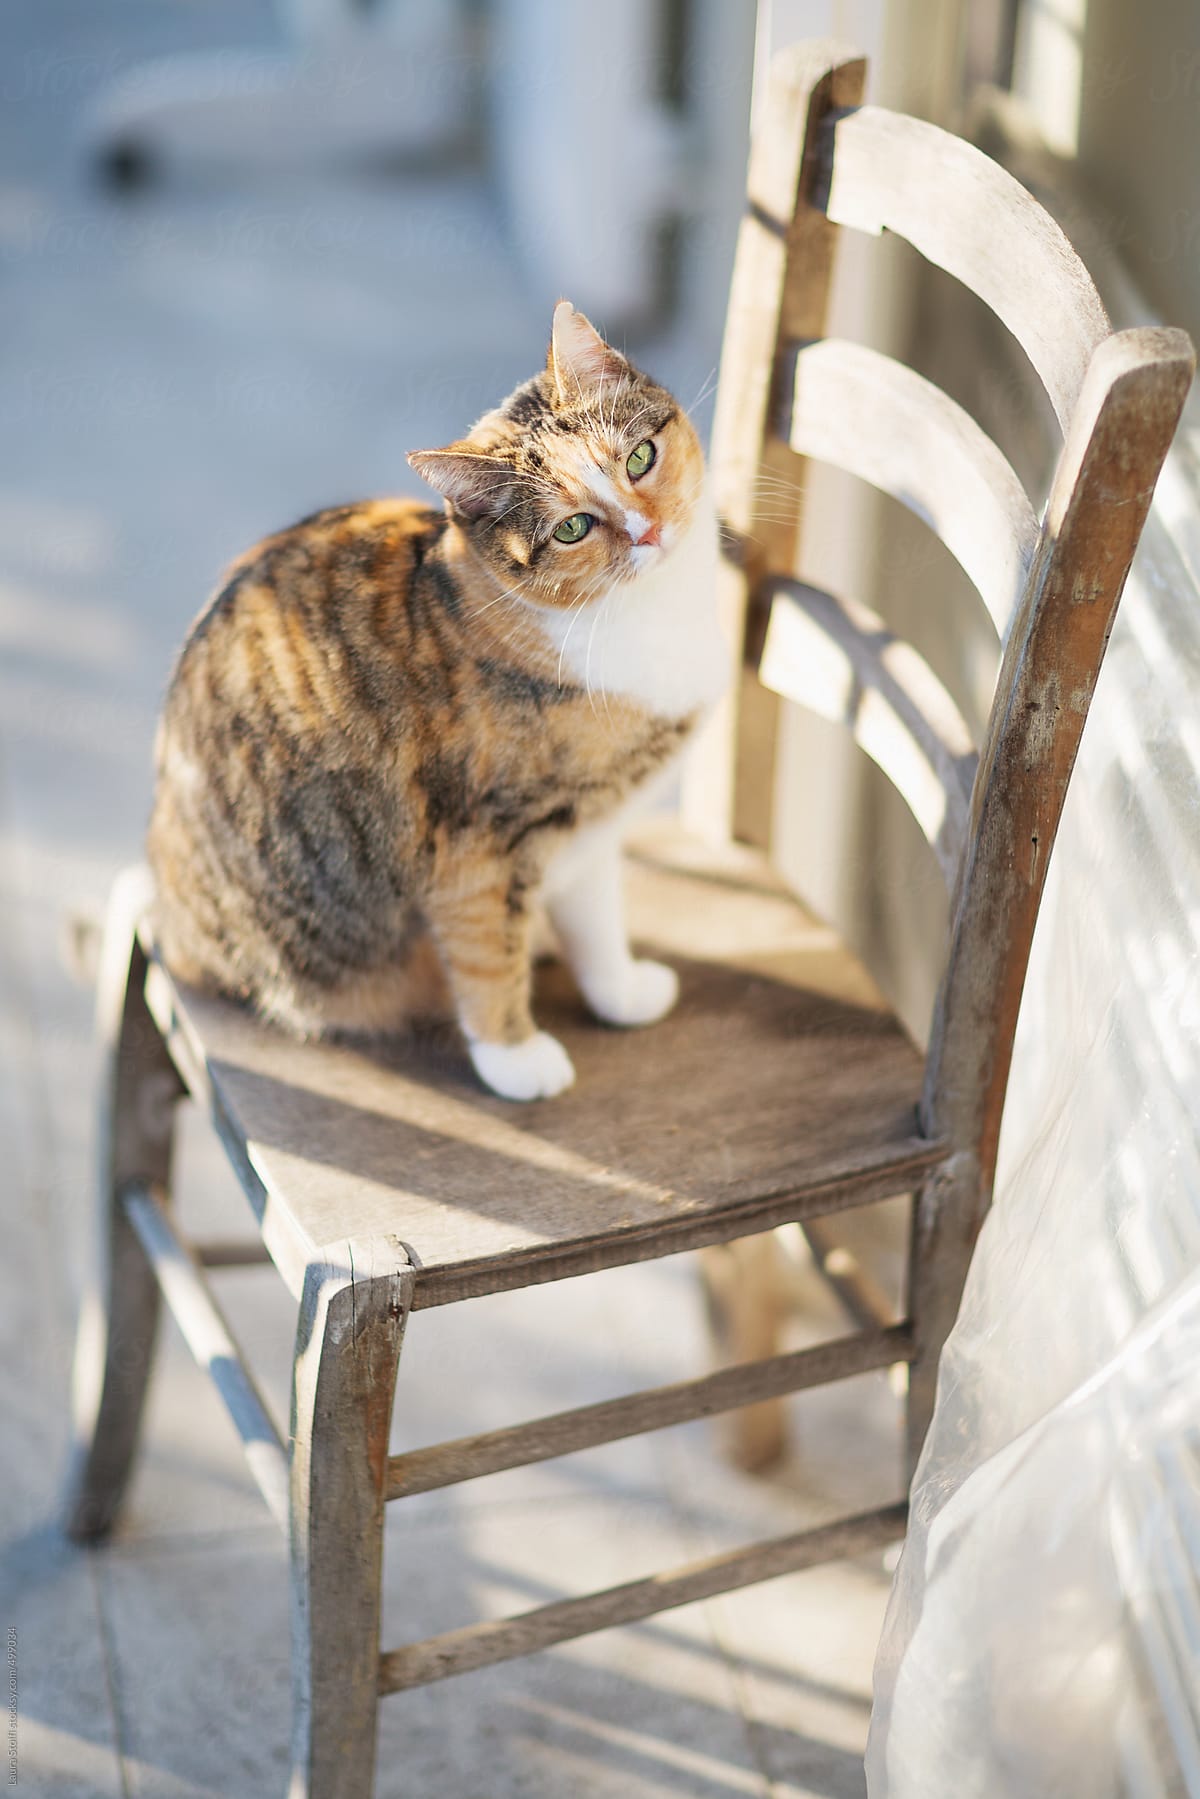 Cat sits on chair in the sun in garden